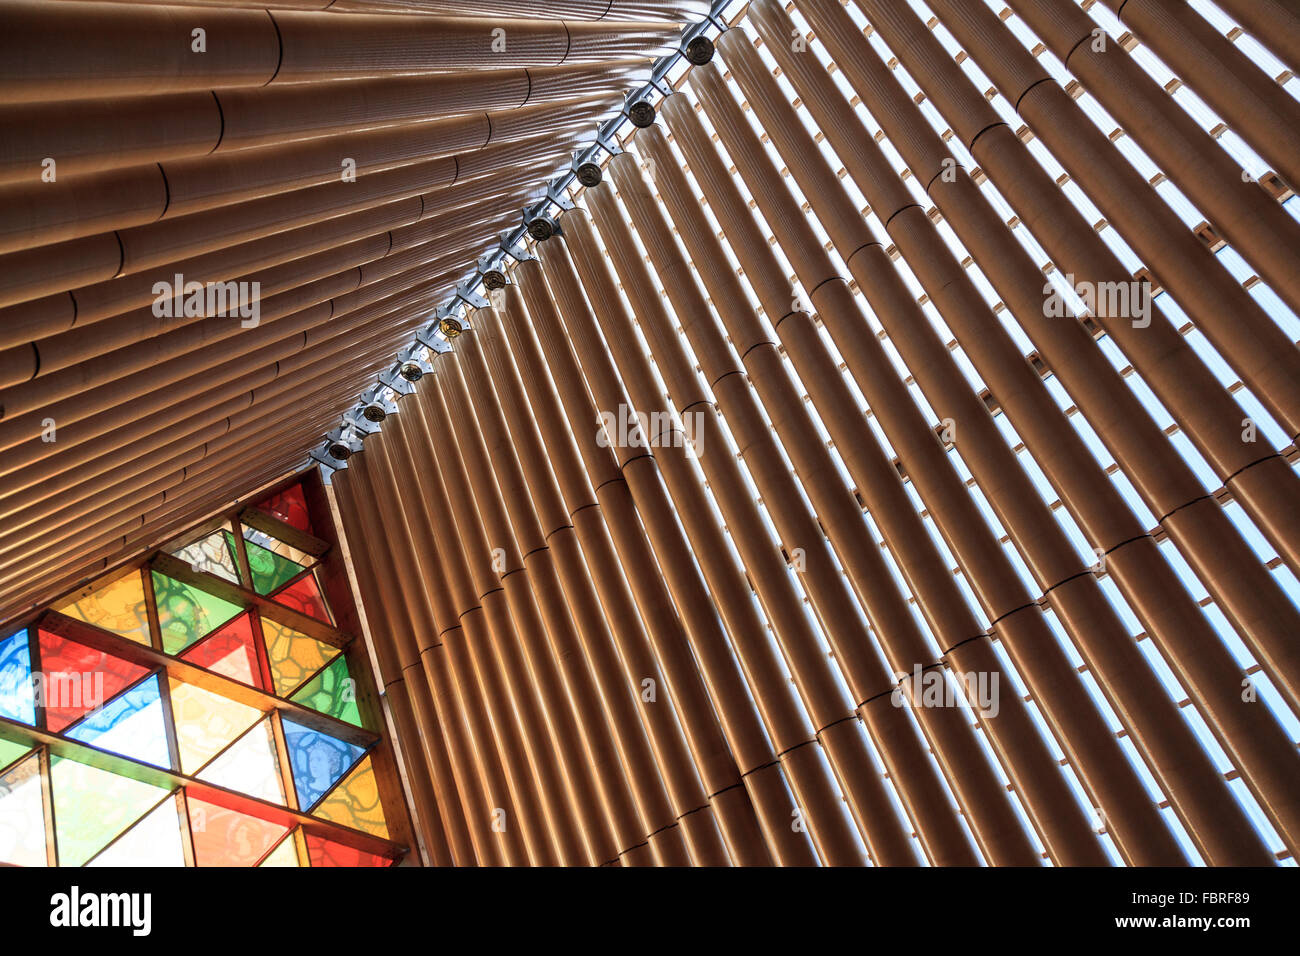 Stained glass window at the Cardboard cathedral designed by Shigeru Ban, Christchurch,Canterbury,South Island,New Zealand Stock Photo